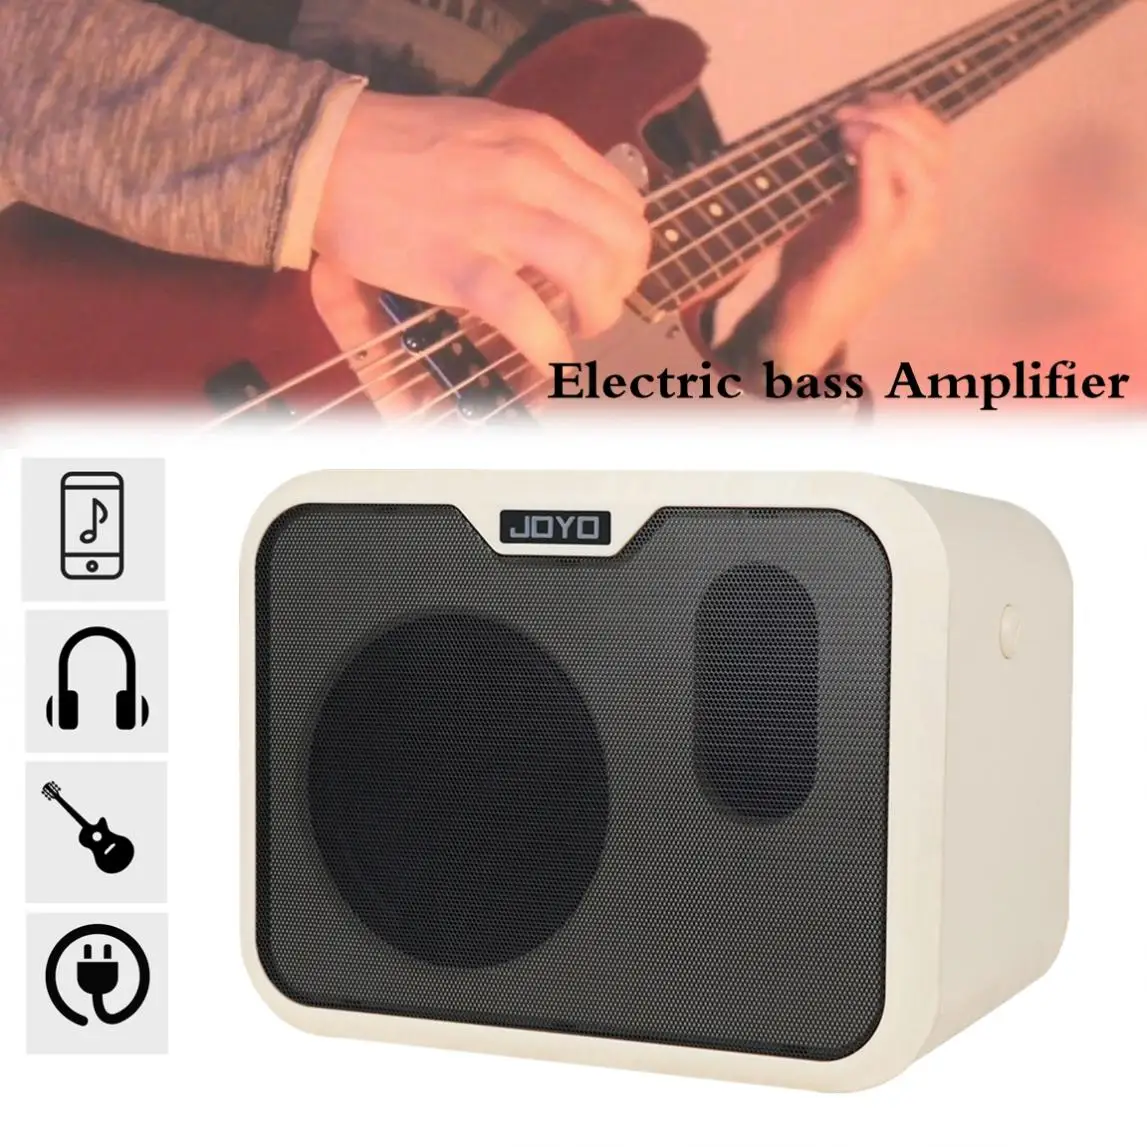 5 Inch Portable Mini Electric Bass Amplifier Speaker 10Watt Amp Normal / Drive Dual Channels with Power Adapter